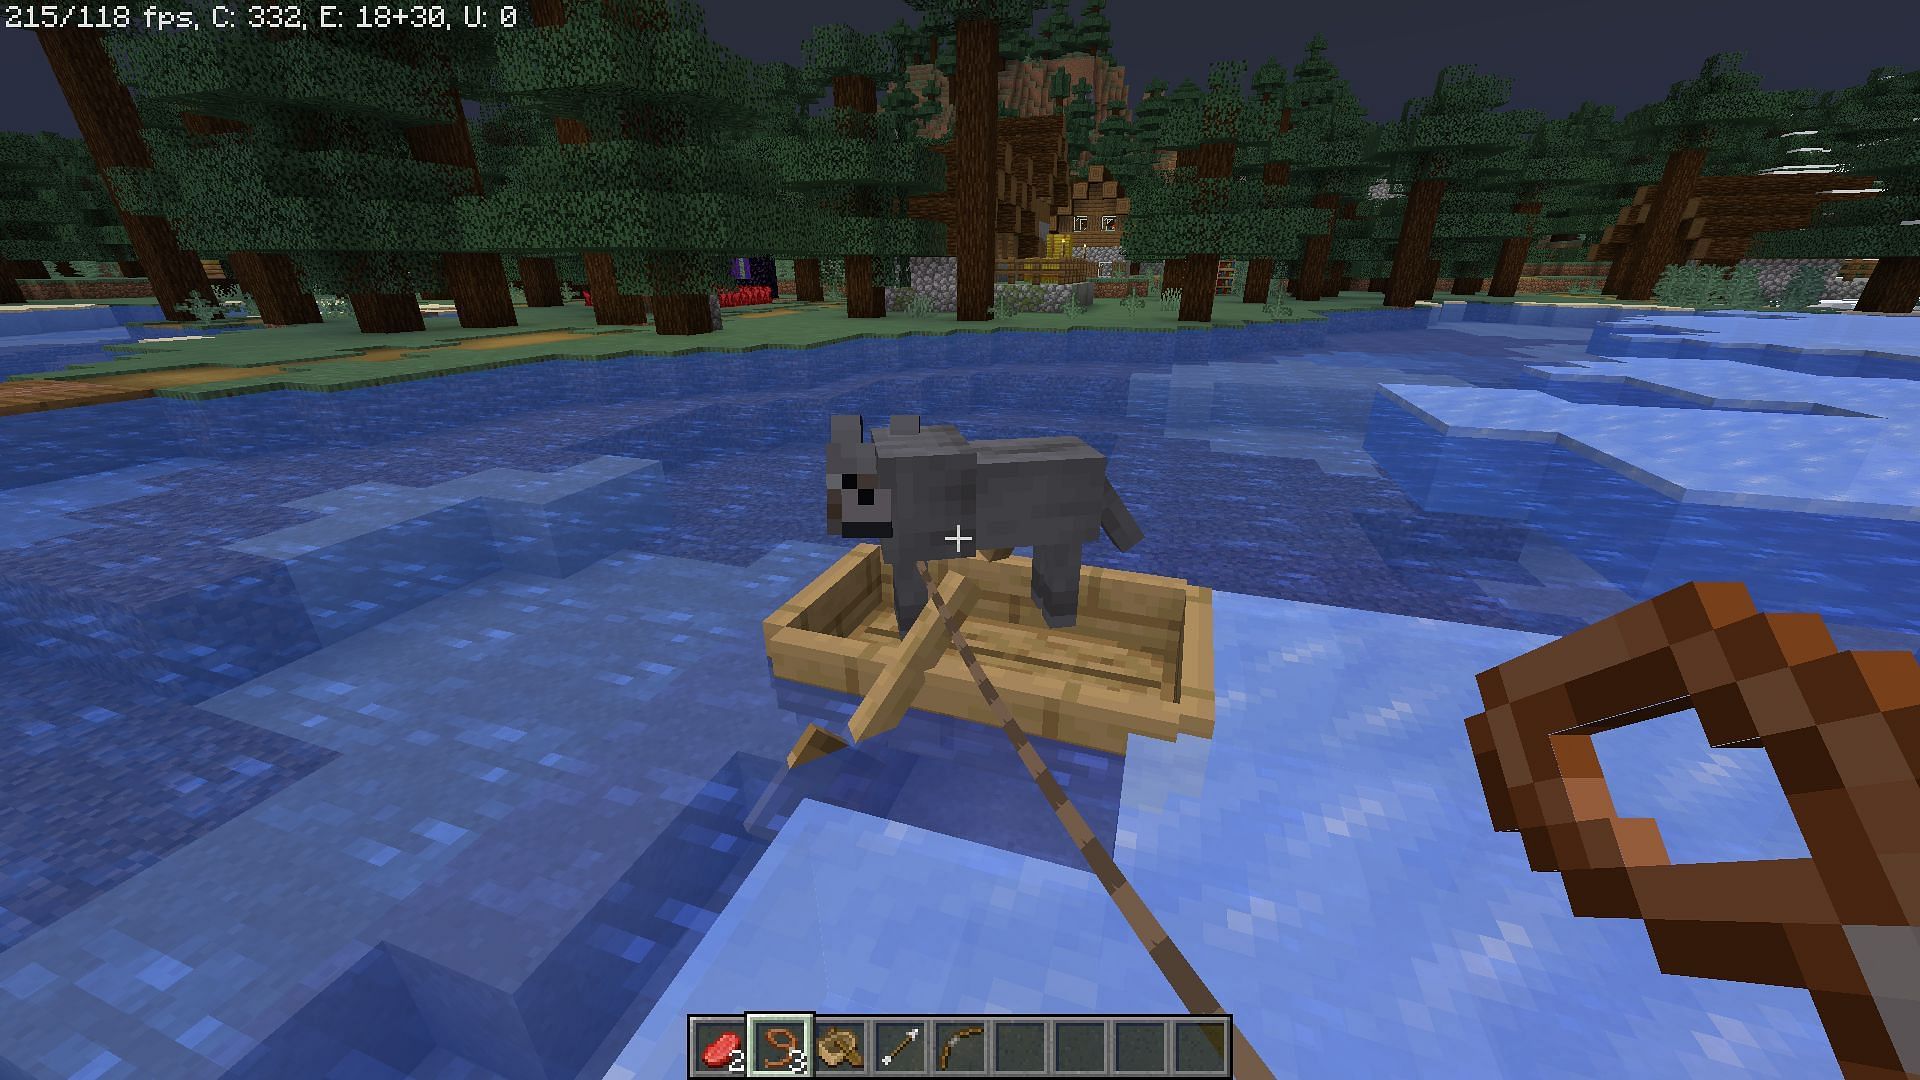 Wolf comes out of the boat after being leashed (Image via Minecraft)